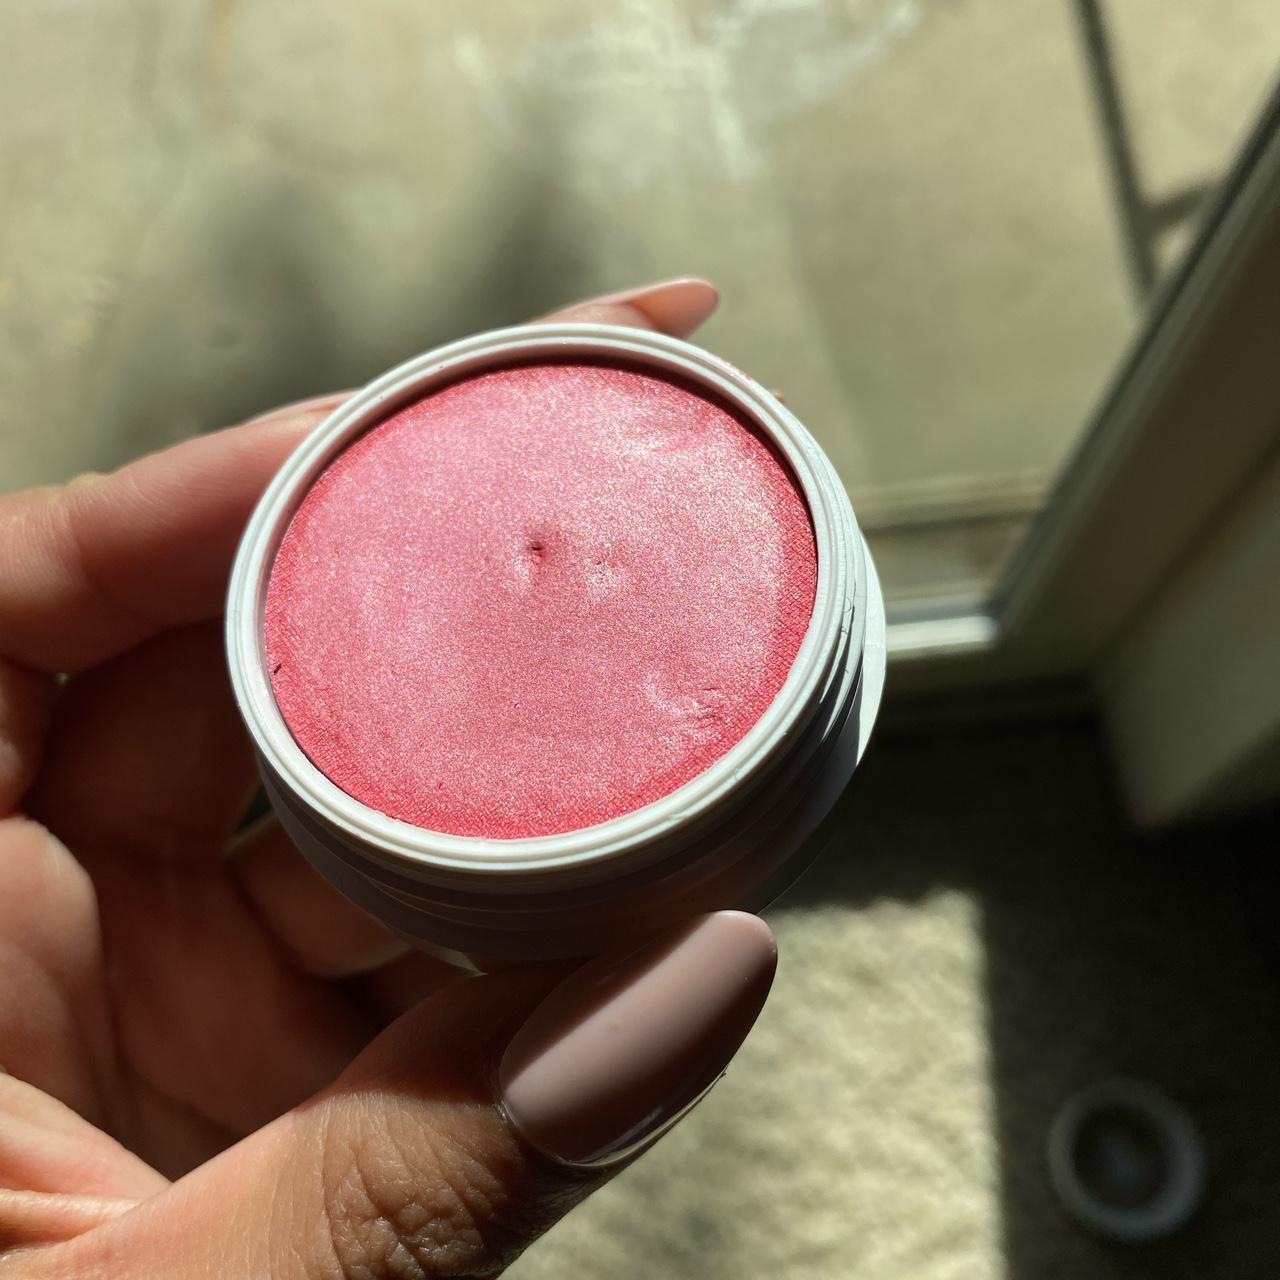 Product Image 2 - Shimmery pink blush 
#karllagerfield #shimmer